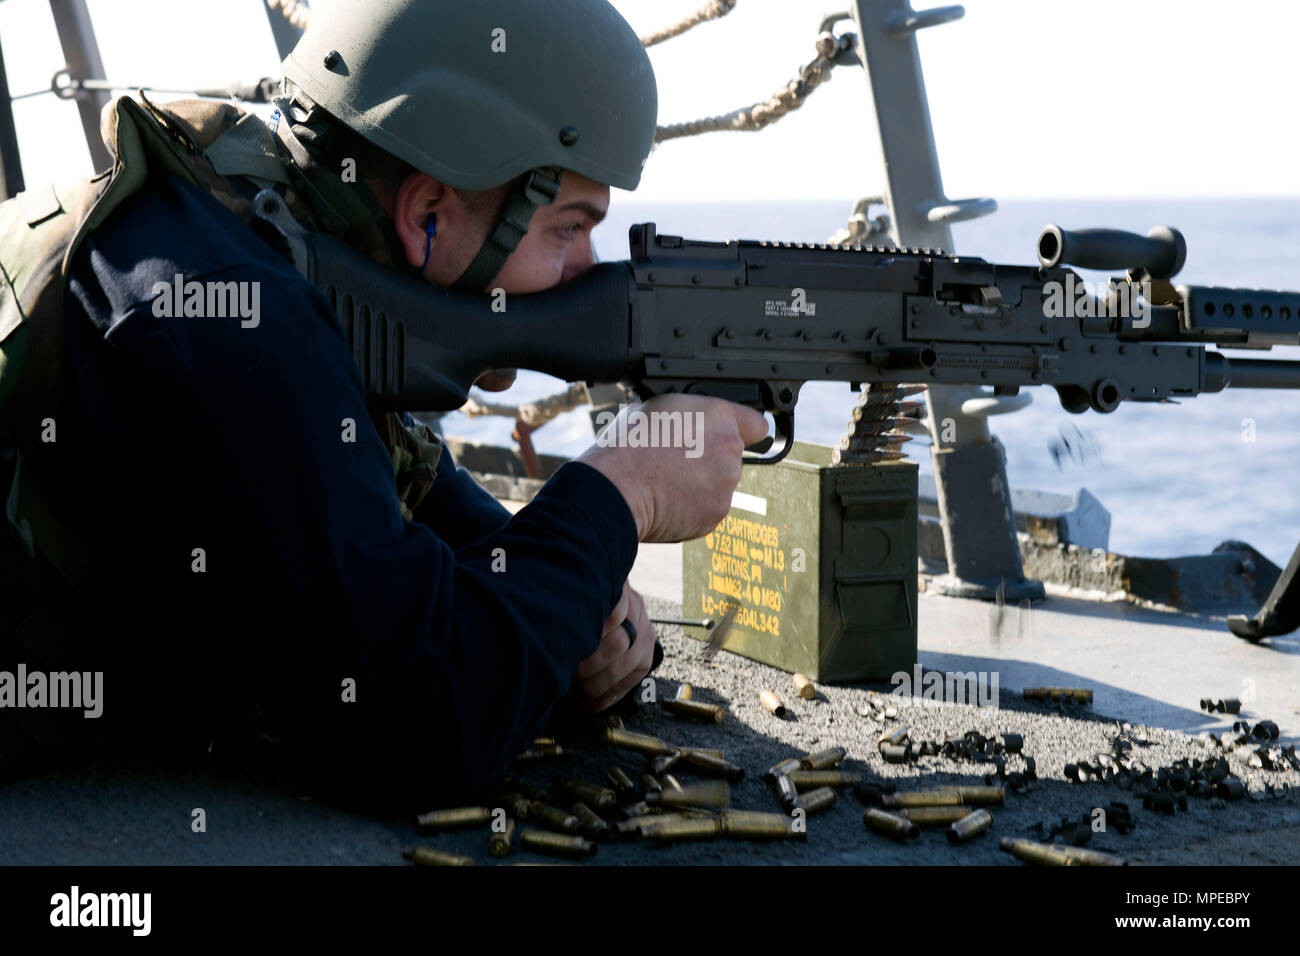 170208-N-NB178-143 MEDITERRANEAN SEA (Feb. 8, 2017) Logistics Specialist 2nd Class Stephen Lowe fires a .50-caliber machine gun during a live-fire exercise aboard the guided-missile destroyer USS Truxtun (DDG 103). Truxtun, part of the George H.W. Bush Strike Group, is conducting naval operations in the U.S. 6th Fleet area of operations in support of U.S. national security interests in Europe. (U.S. Navy photo by Mass Communication Specialist 2nd Class Tyrell K. Morris/Released) Stock Photo